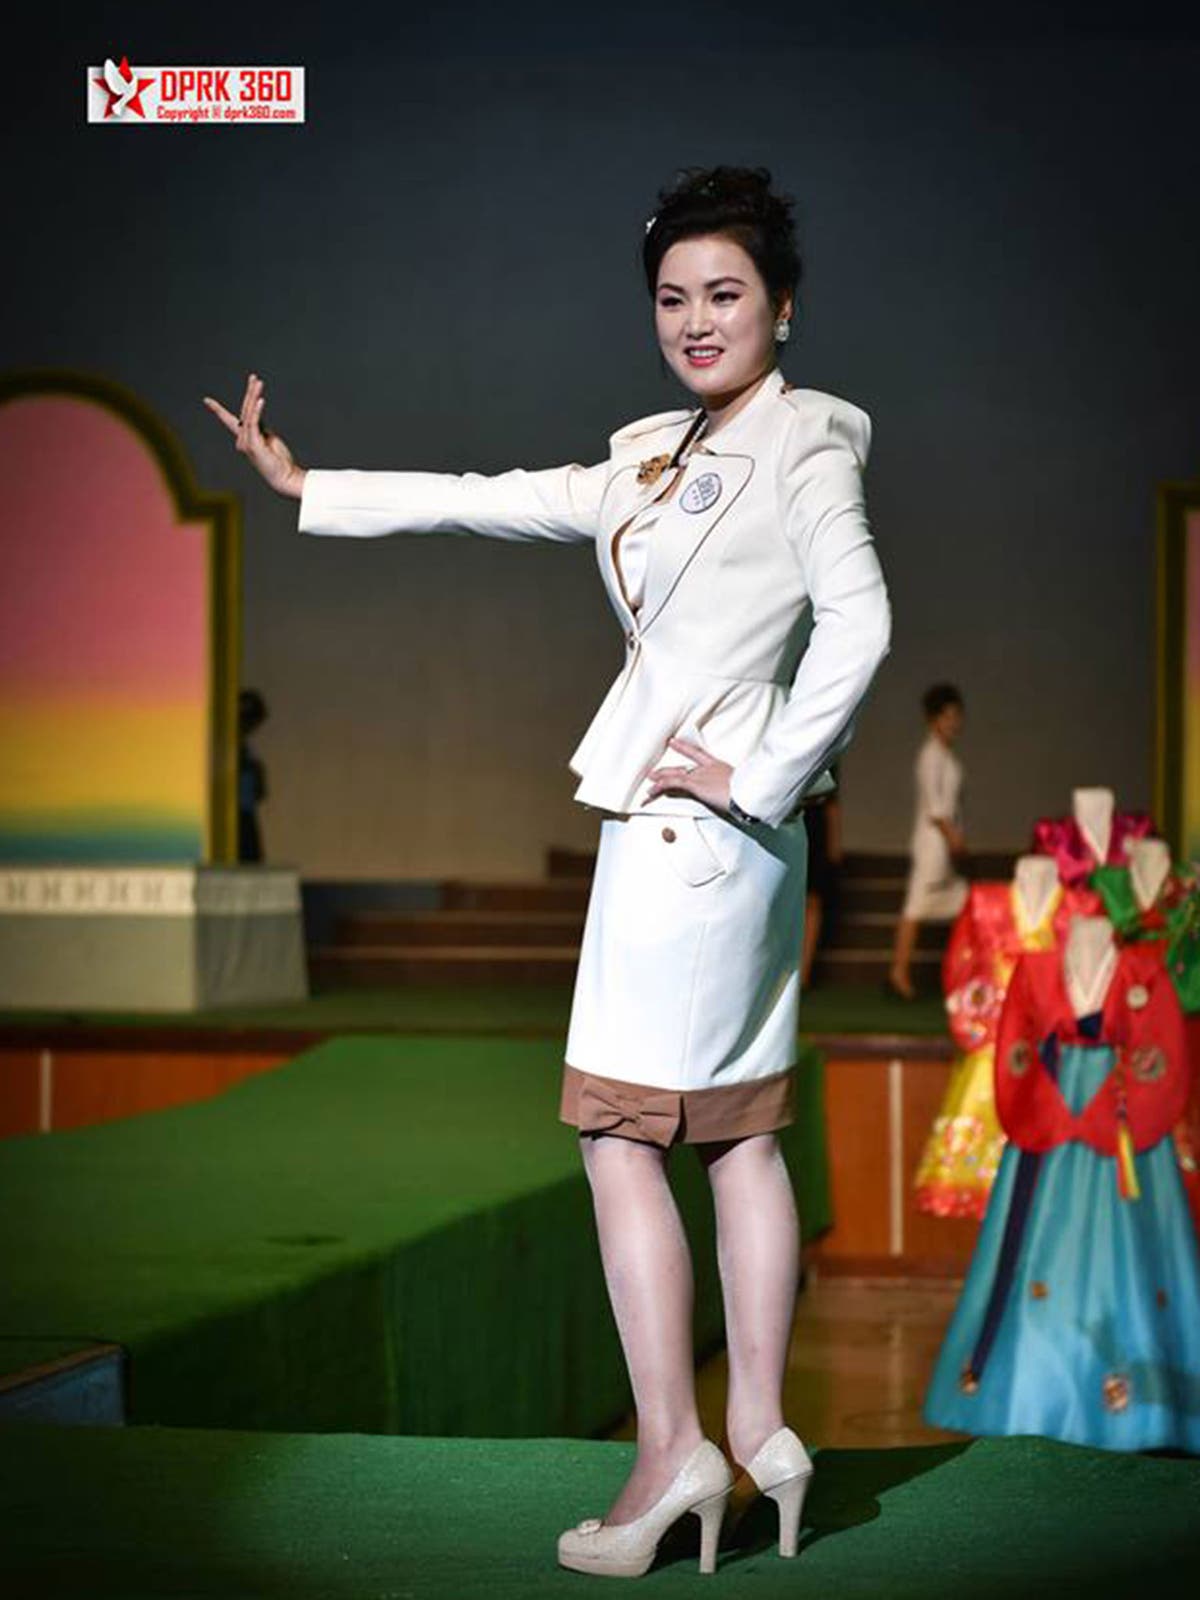 North Korea: Inside Pyongyang's annual fashion show | The Independent